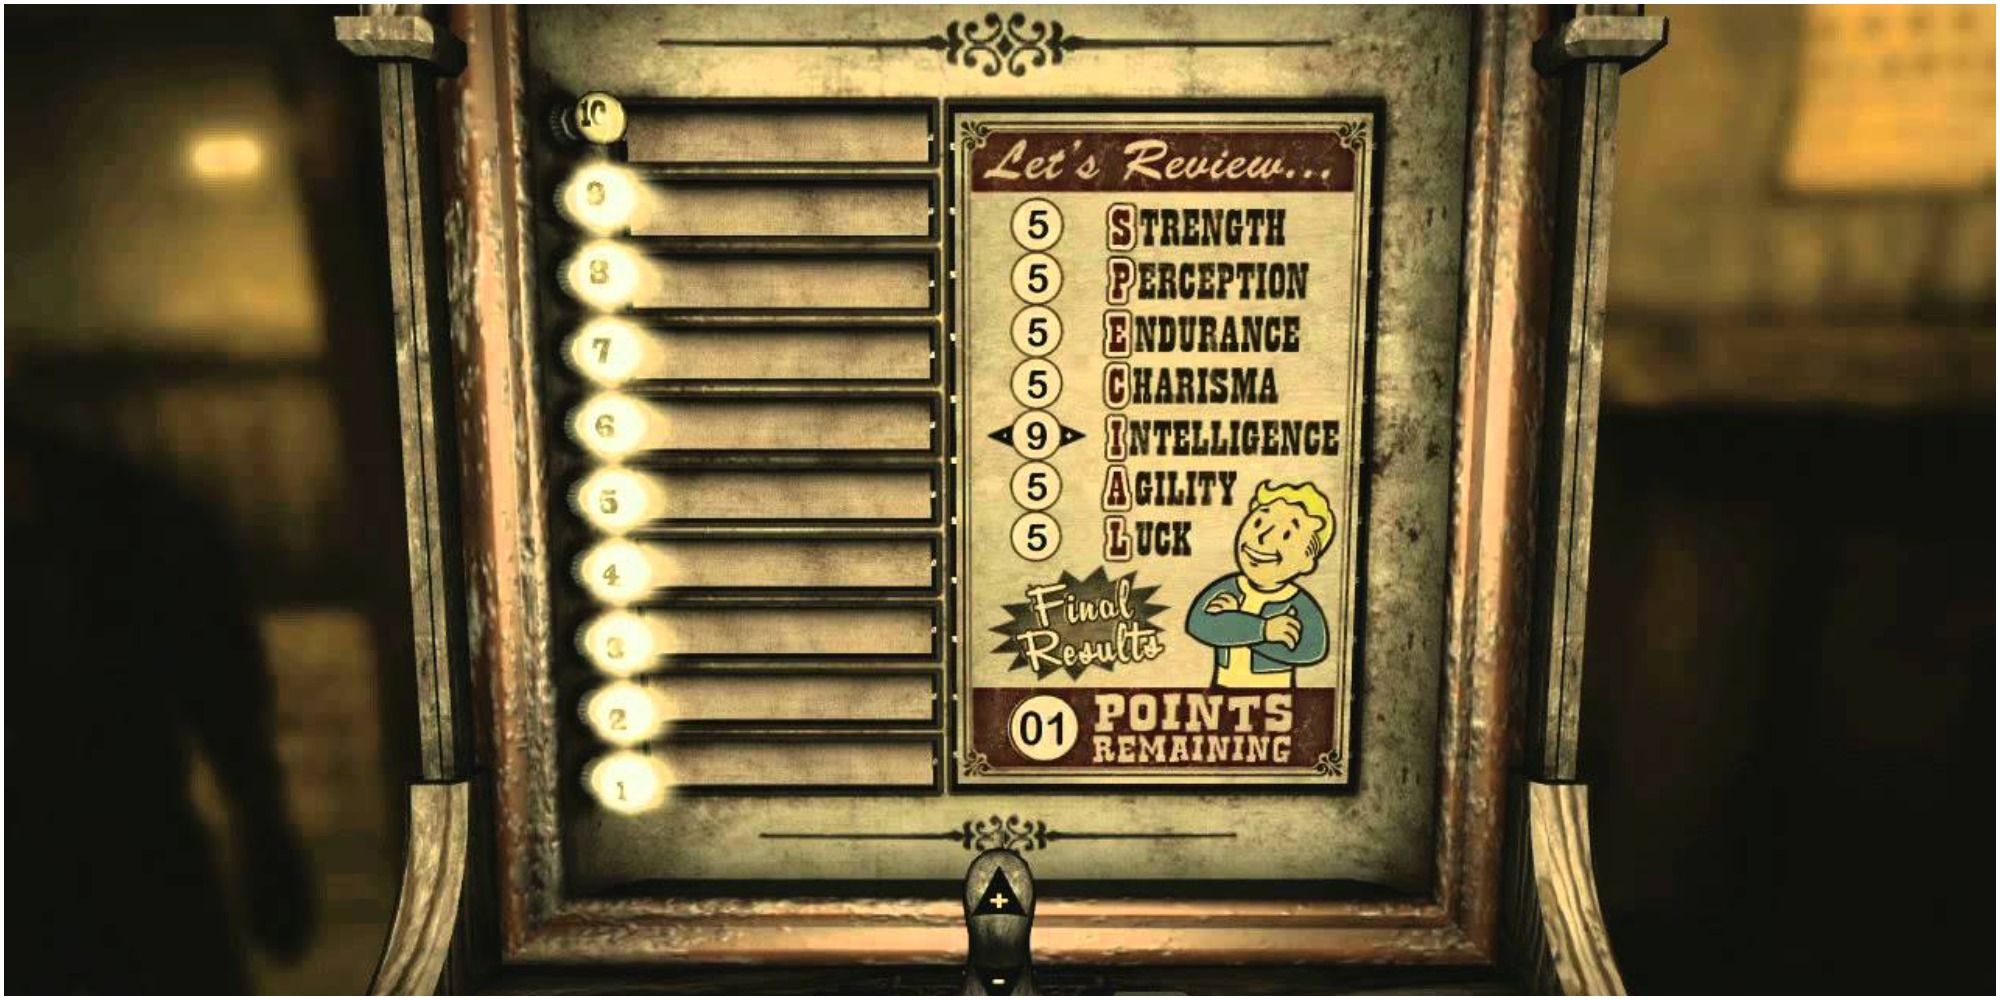 The Character Creation screen in Fallout: New Vegas